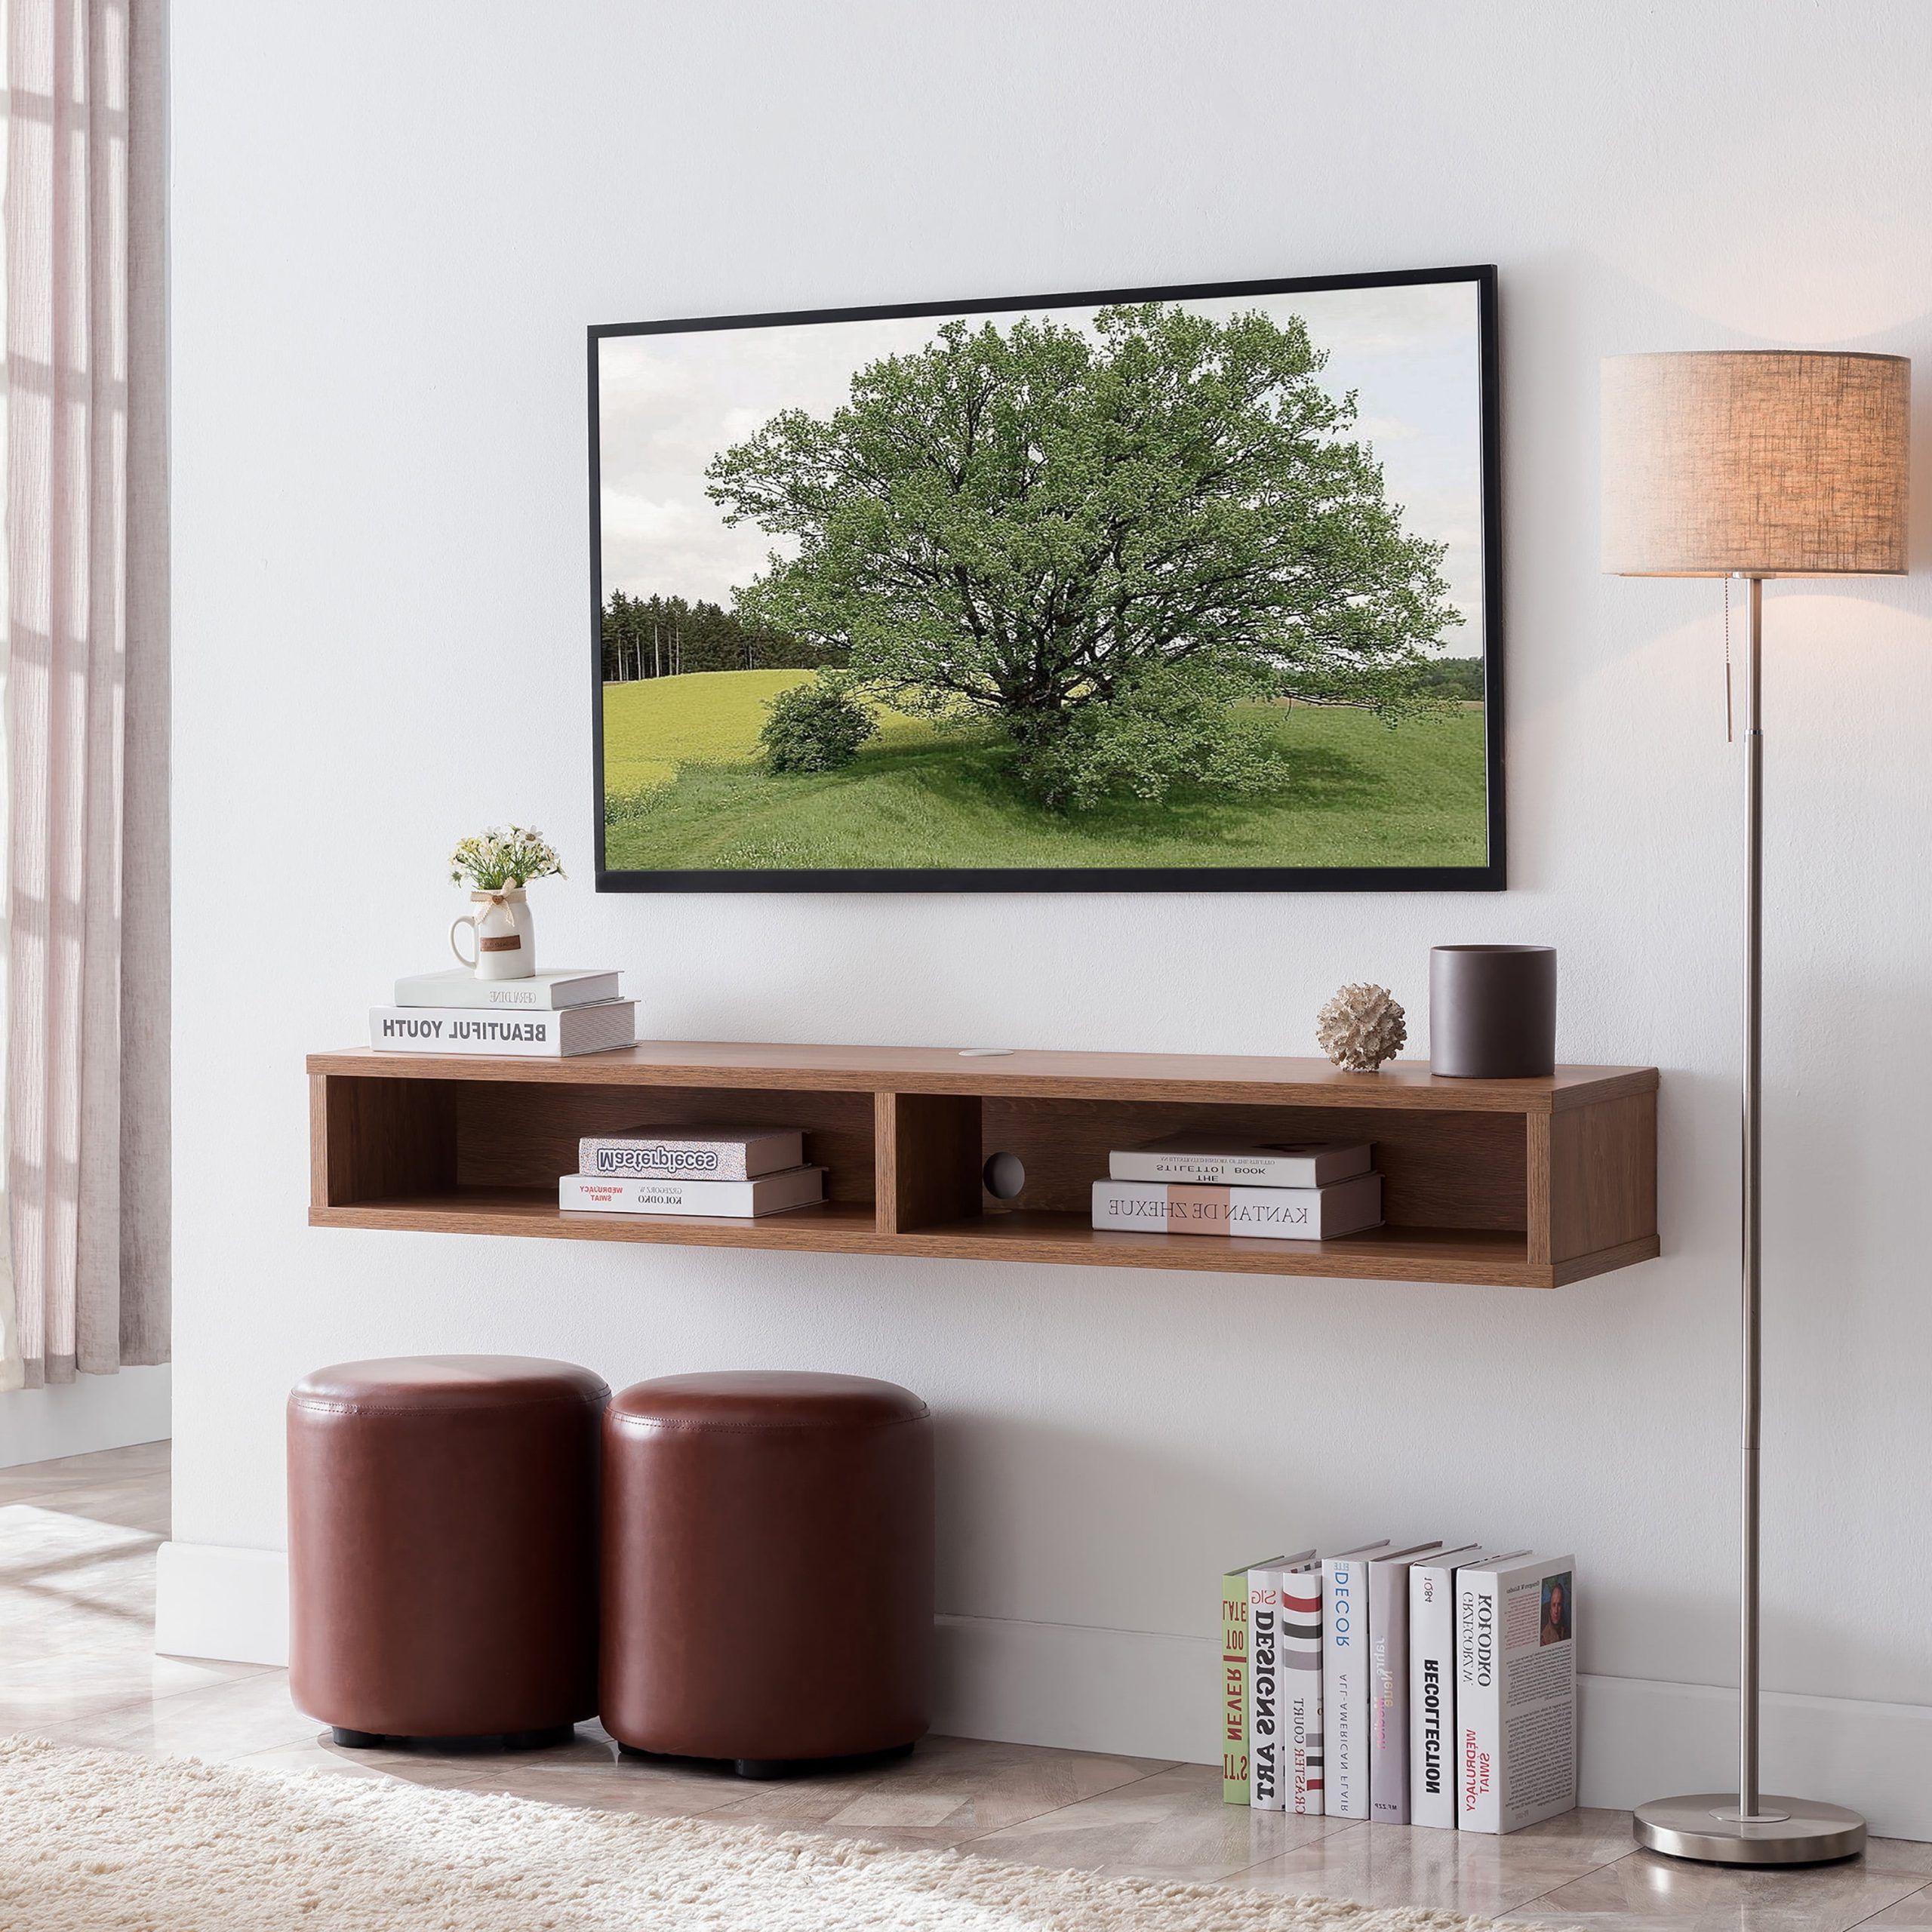 Furniture Of America Evaine 2 Shelf Floating Tv Stand, Weathered Oak Within Floating Stands For Tvs (View 3 of 20)